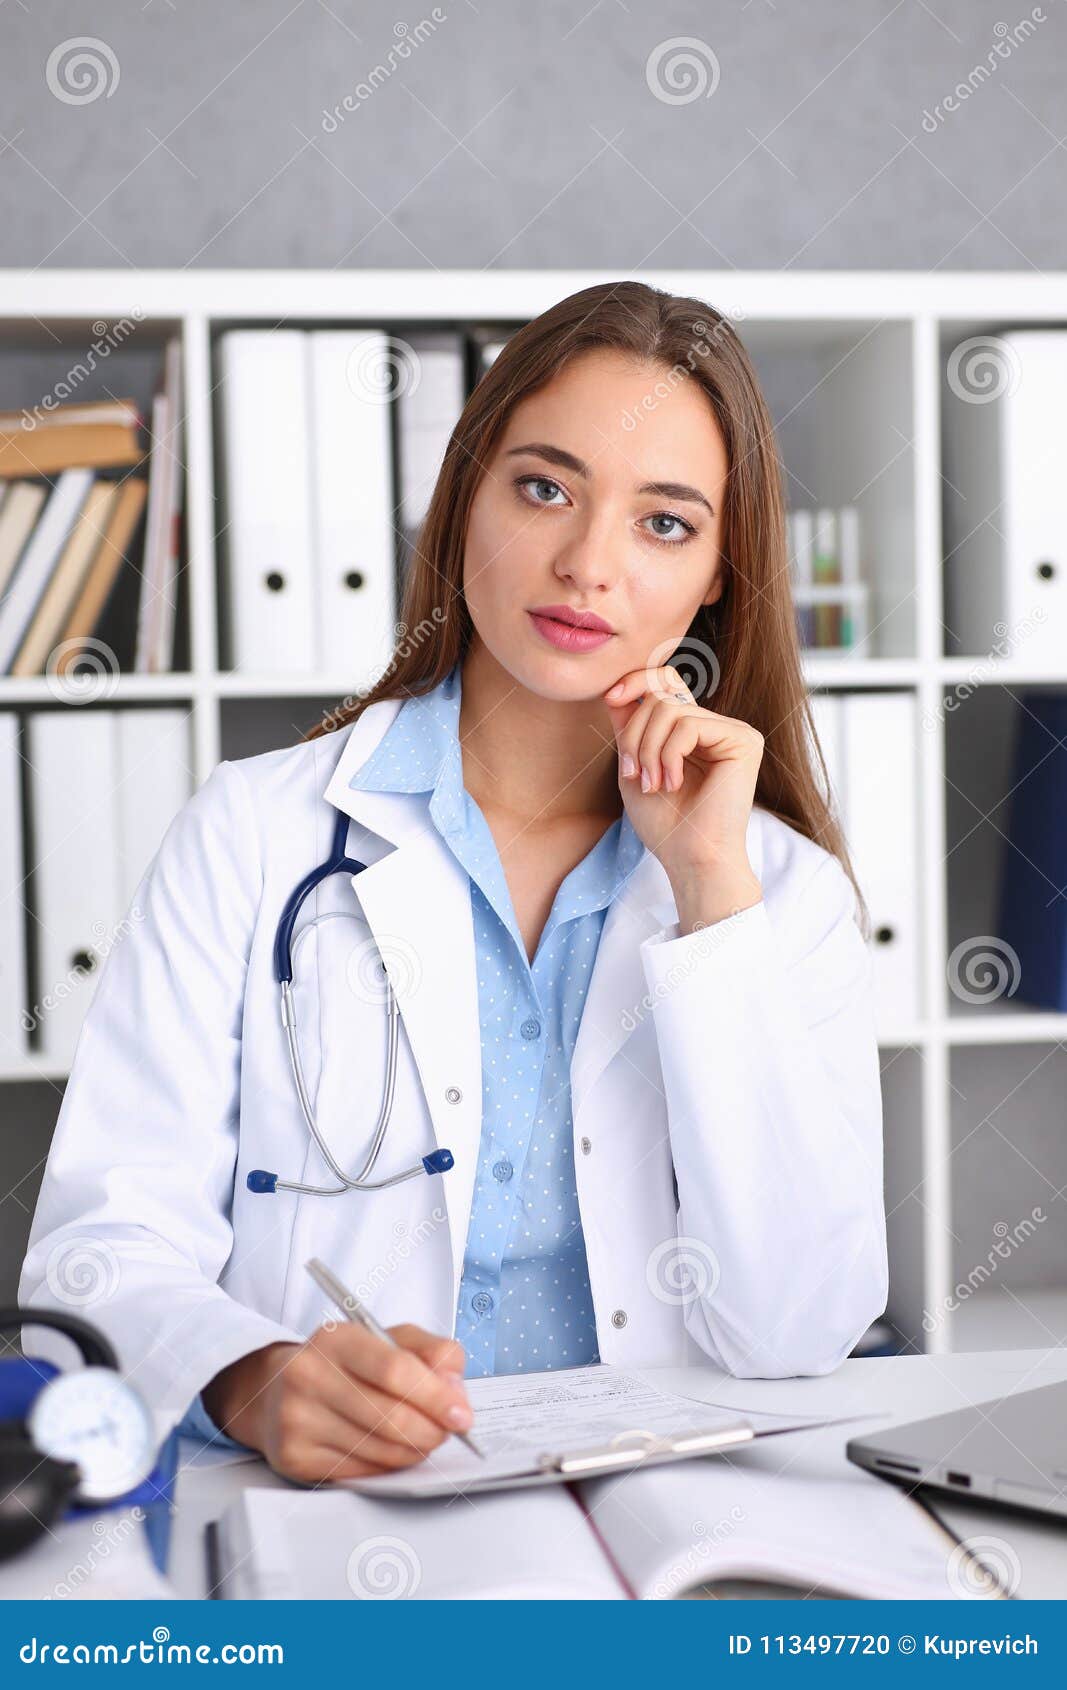 Female doctor hold hold in arm silver pen and pad during ward round check portrait. Medic exam aid visit and remedy prescribe for sick office business visitor with problem and complaint for anamnesis